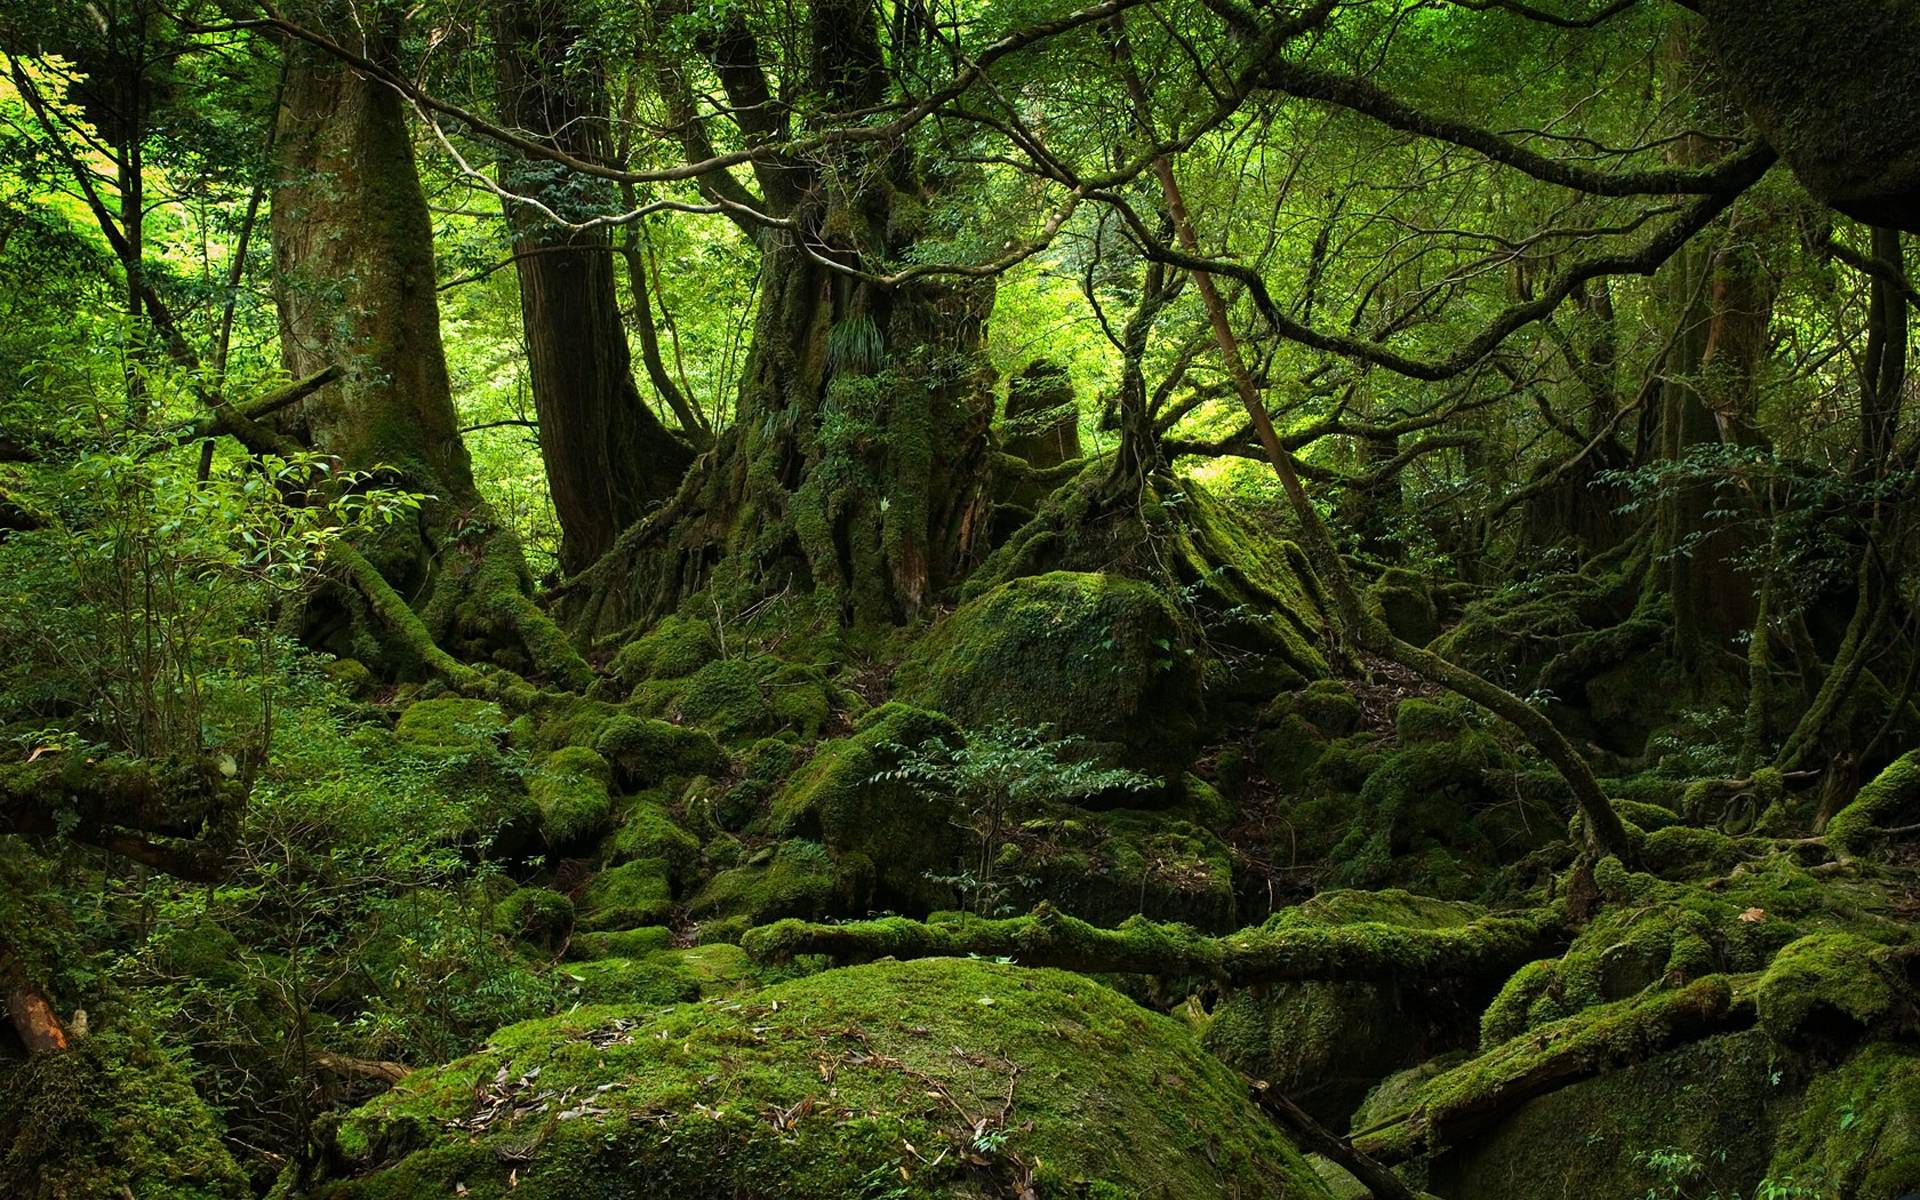 Aokigahara forest